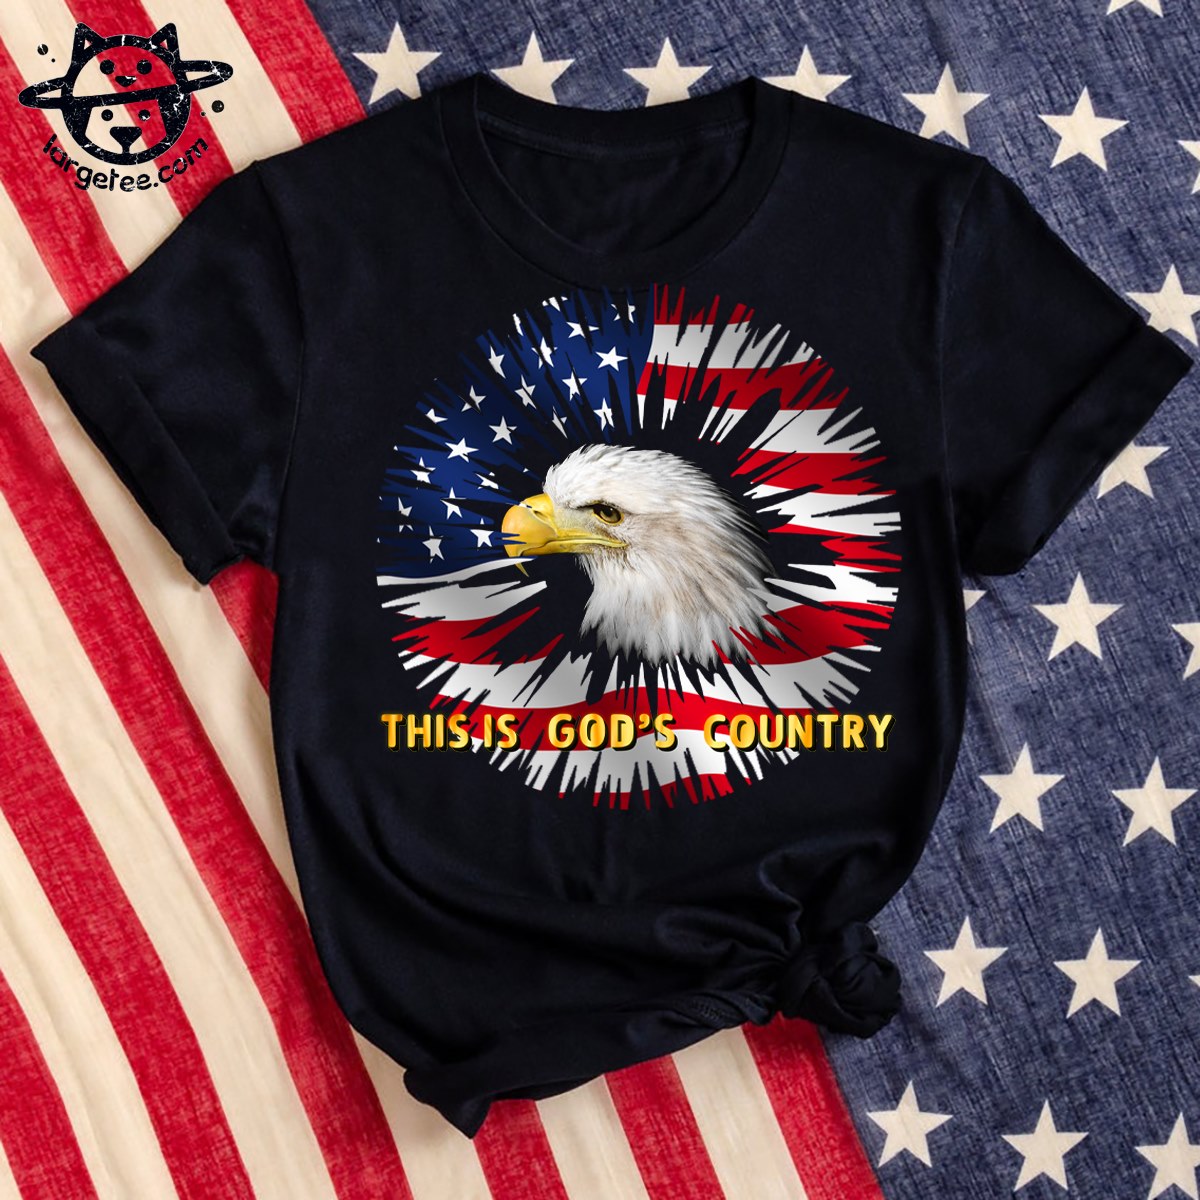 This is god's country - Eagle and america flag